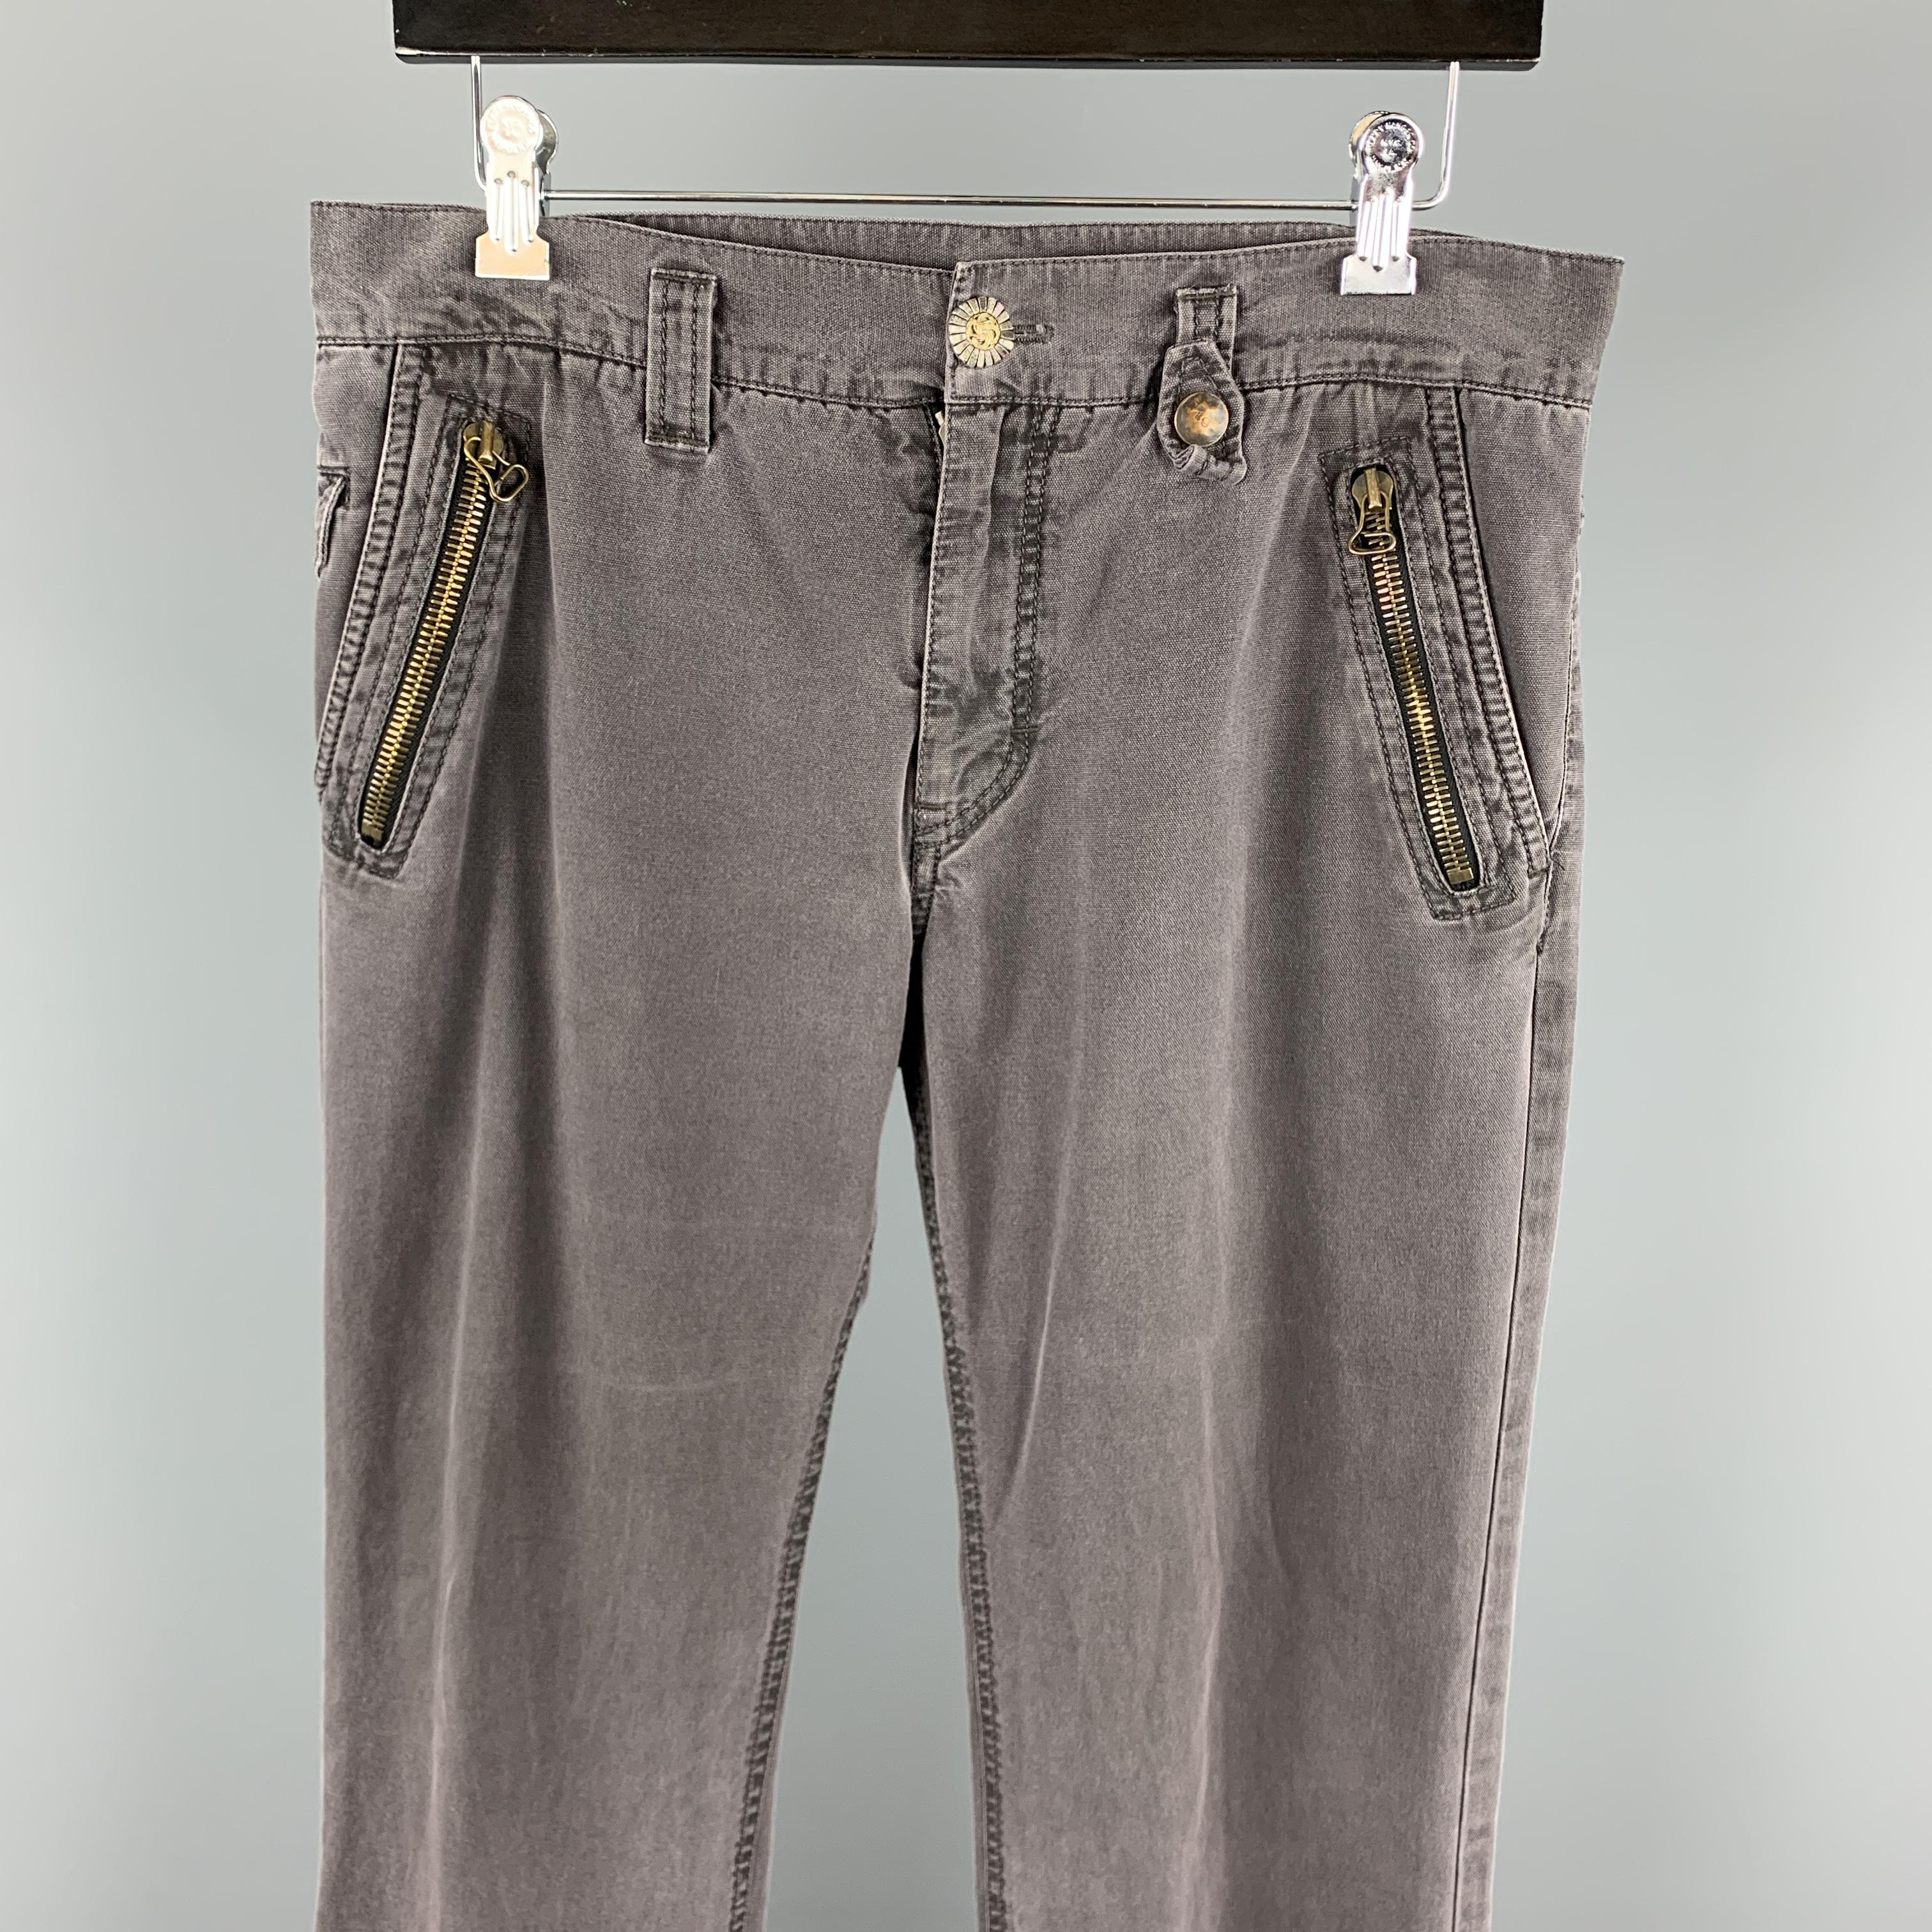 CLOAK casual pants comes in a charcoal wash cotton featuring zipper pockets and a zip fly closure. Made in Italy.

Very Good Pre-Owned Condition.
Marked: 32

Measurements:

Waist: 32 in. 
Rise: 9 in. 
Inseam: 31 in. 